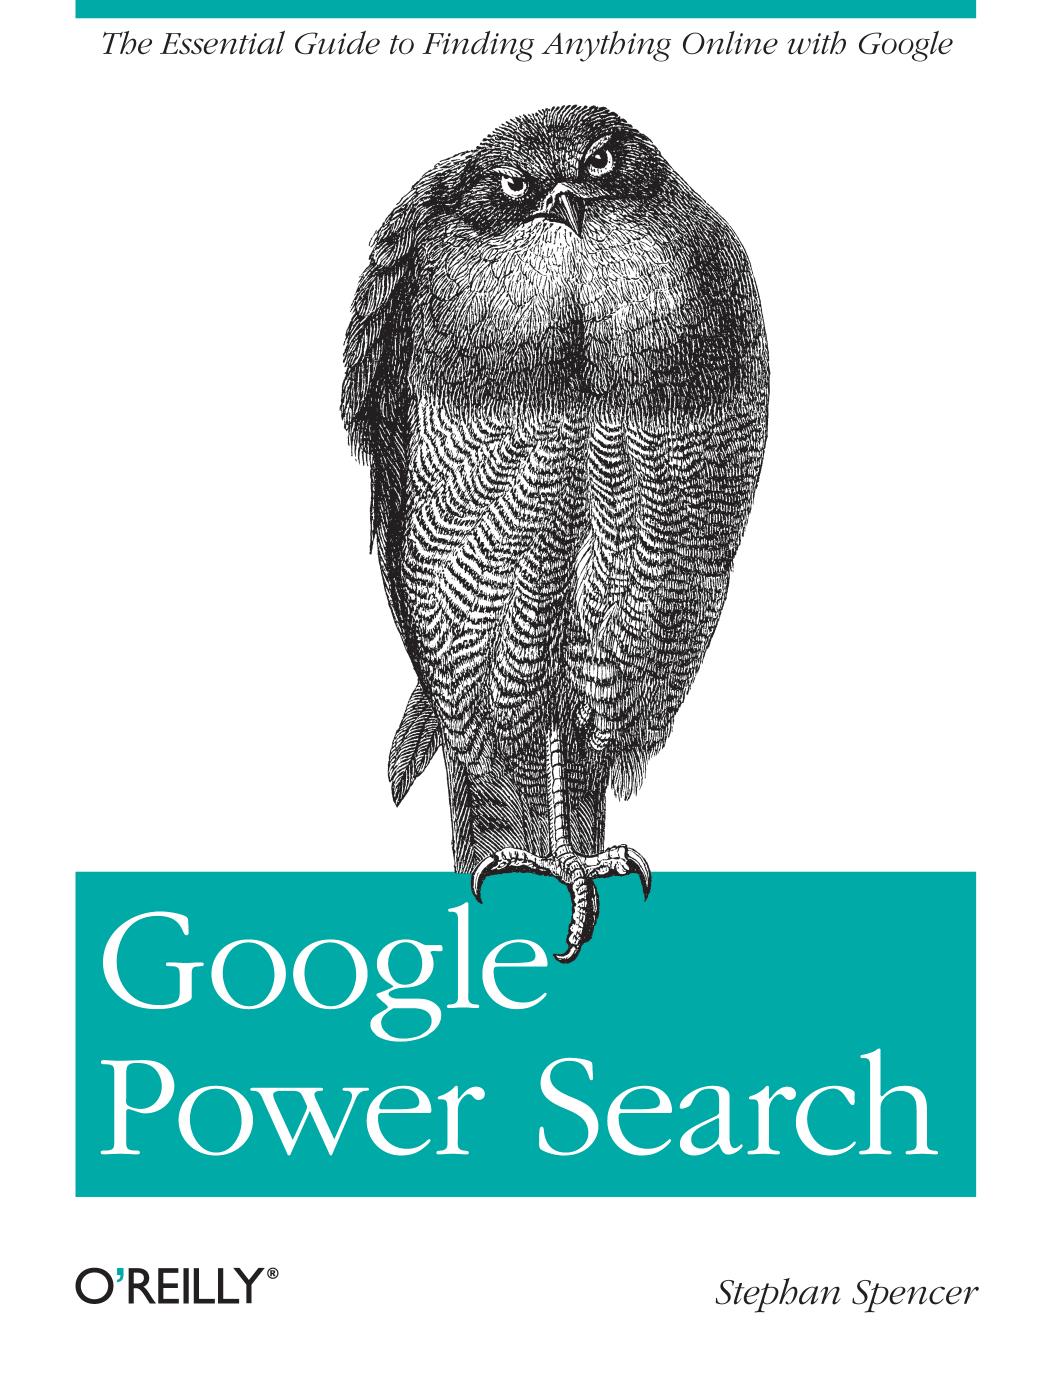 Google Power Search by Stephan Spencer